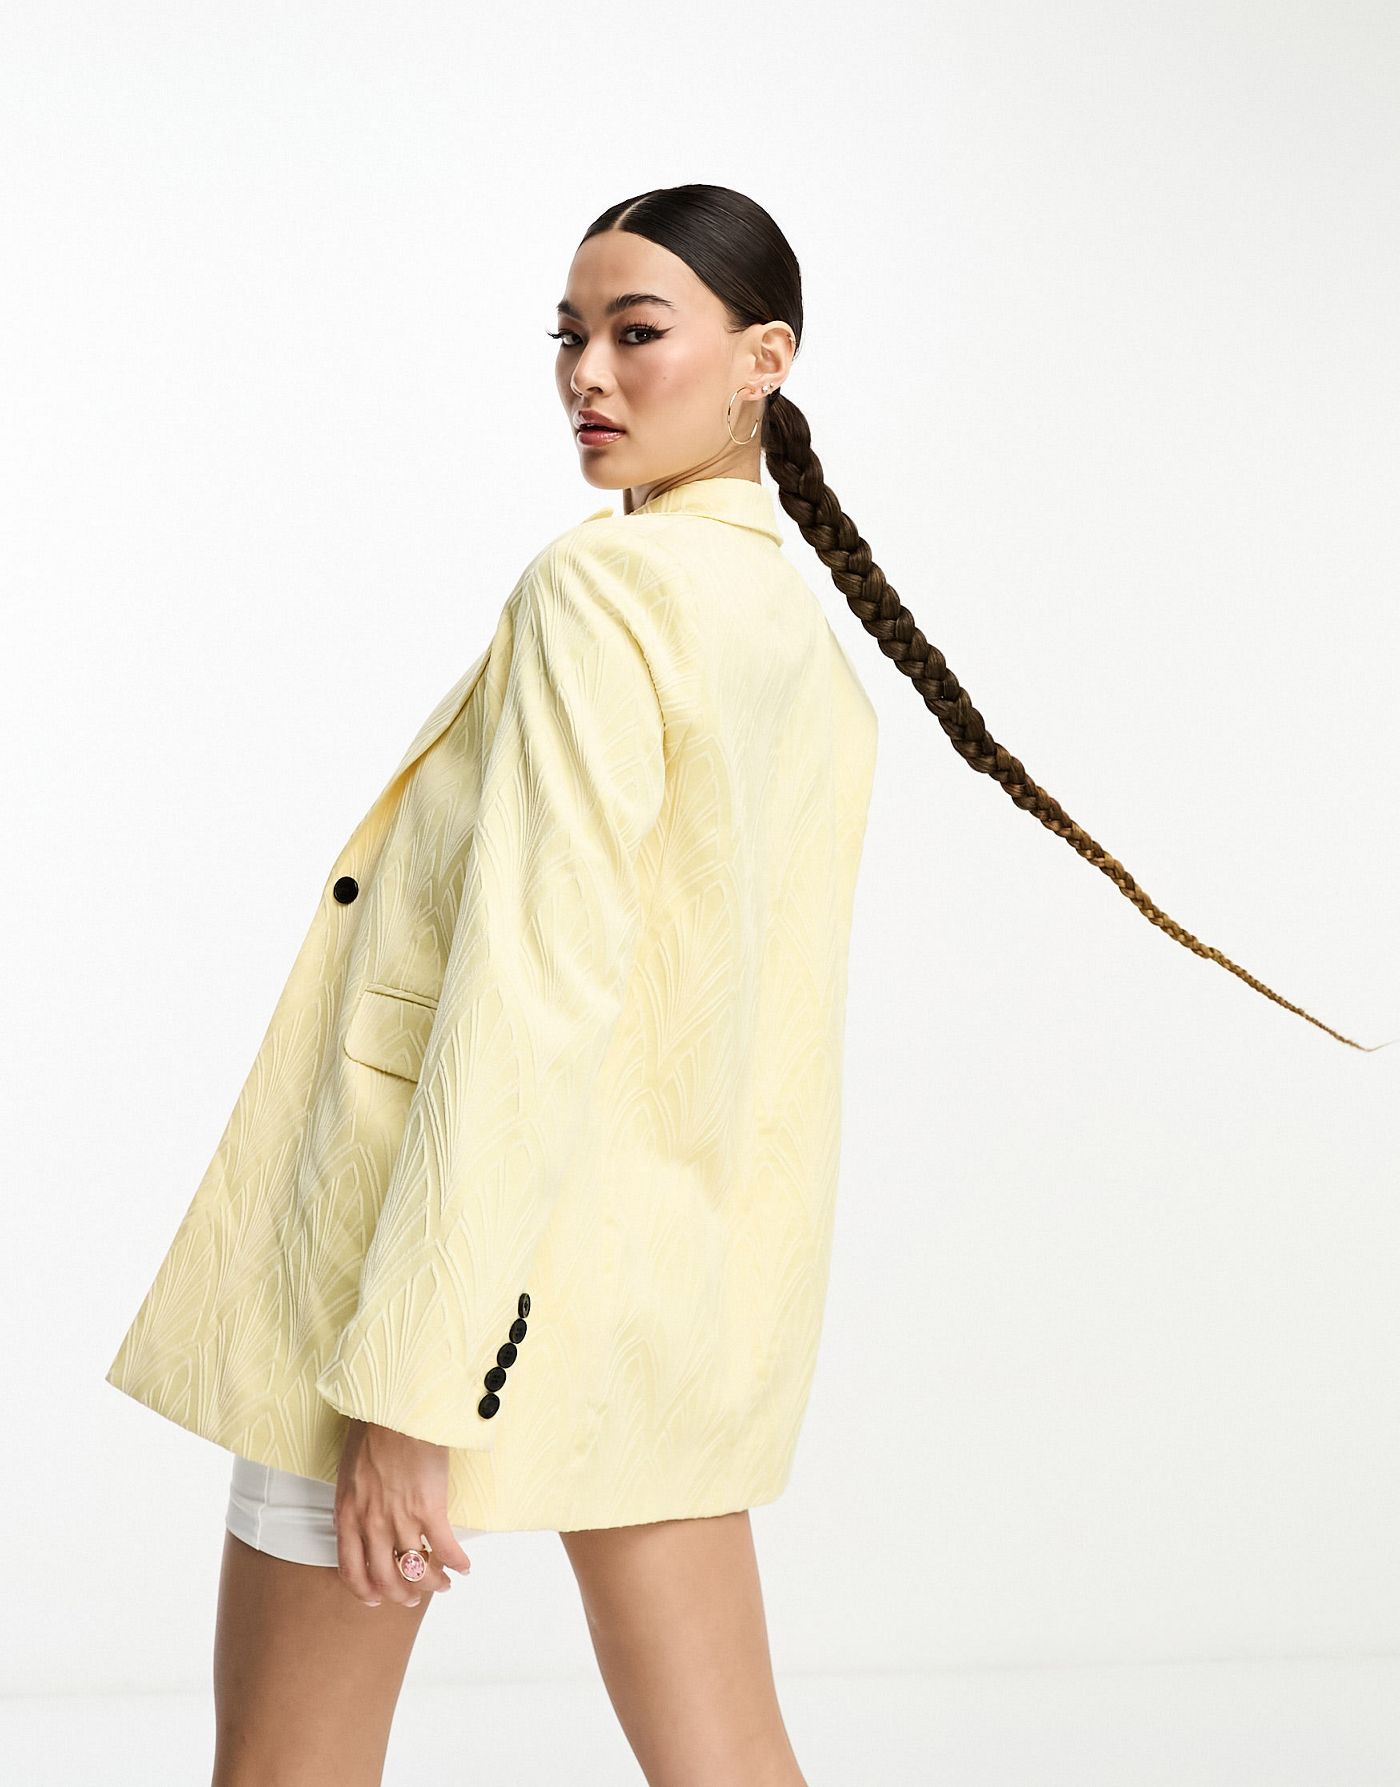 Twisted Tailor jacquard suit jacket in yellow